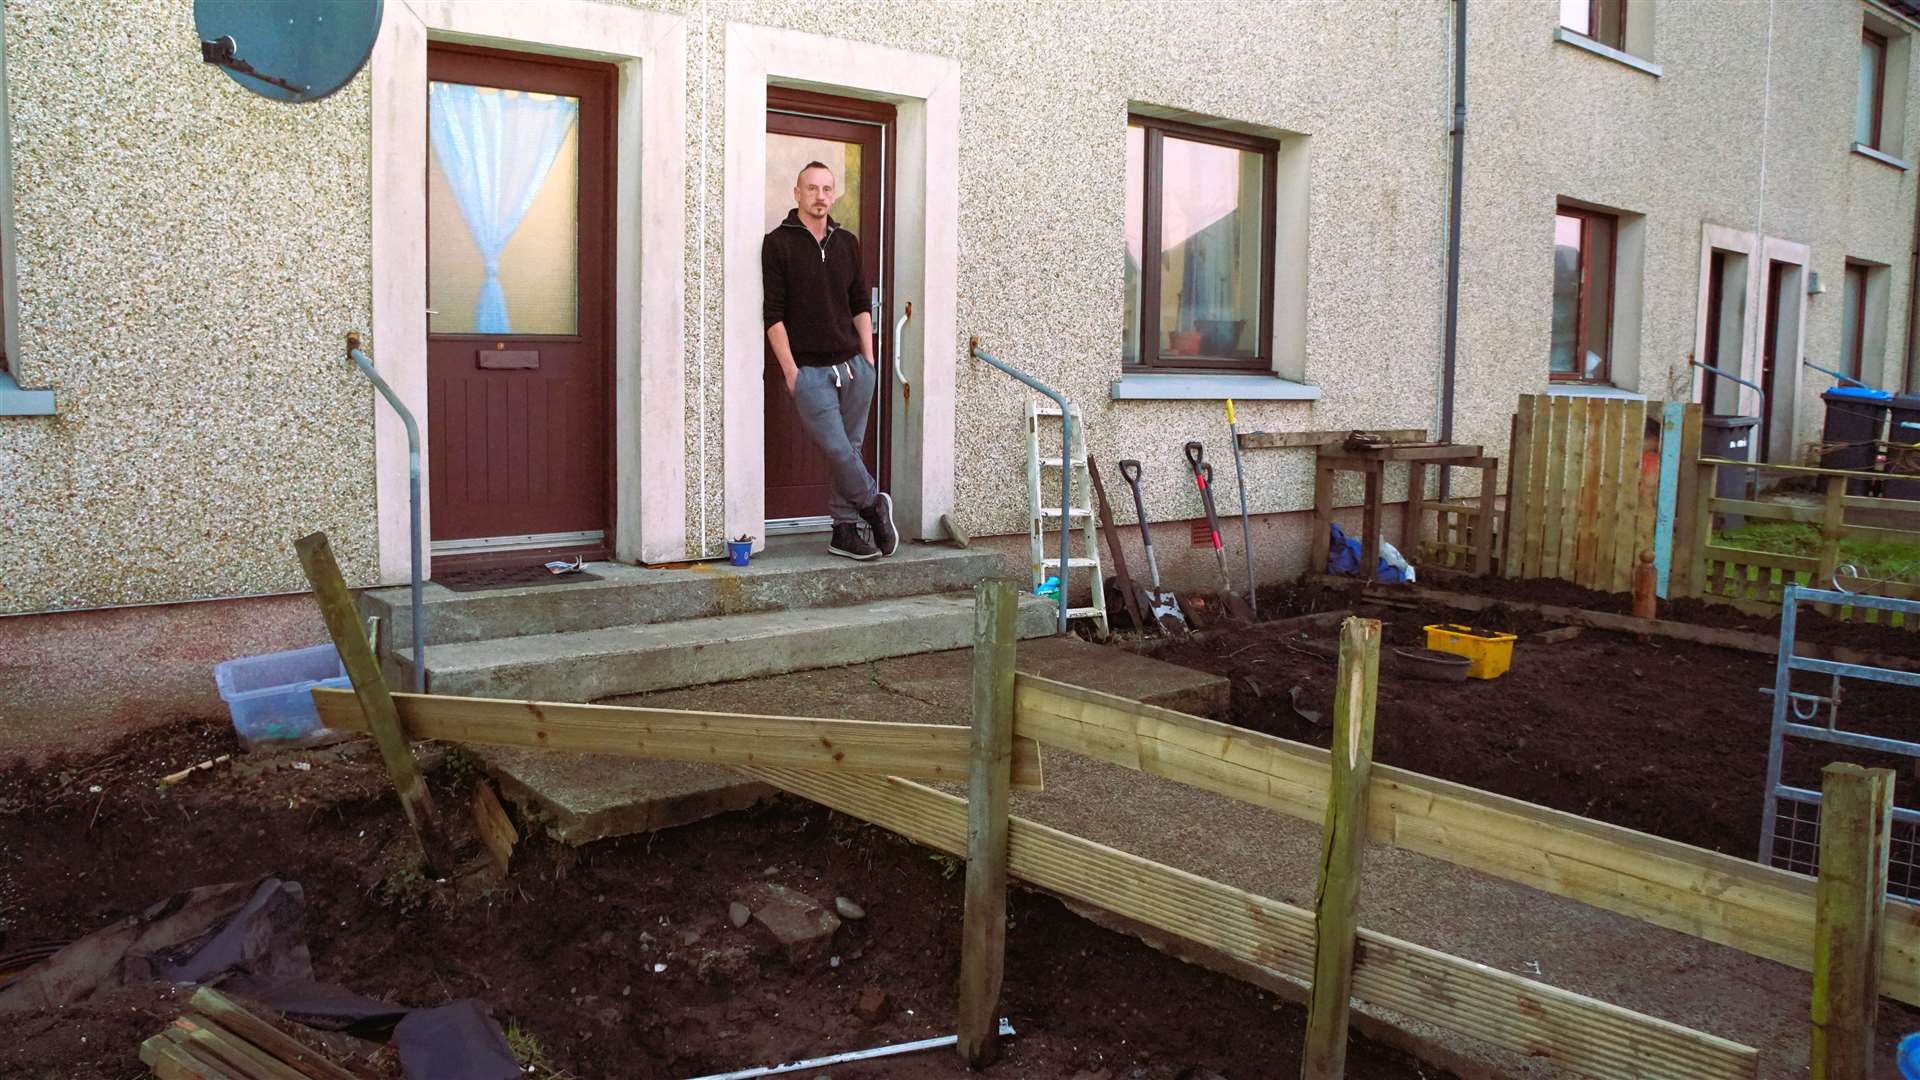 The Lybster man is digging up the garden to make a fish-pond and polytunnel space surrounded by trees. Picture: DGS